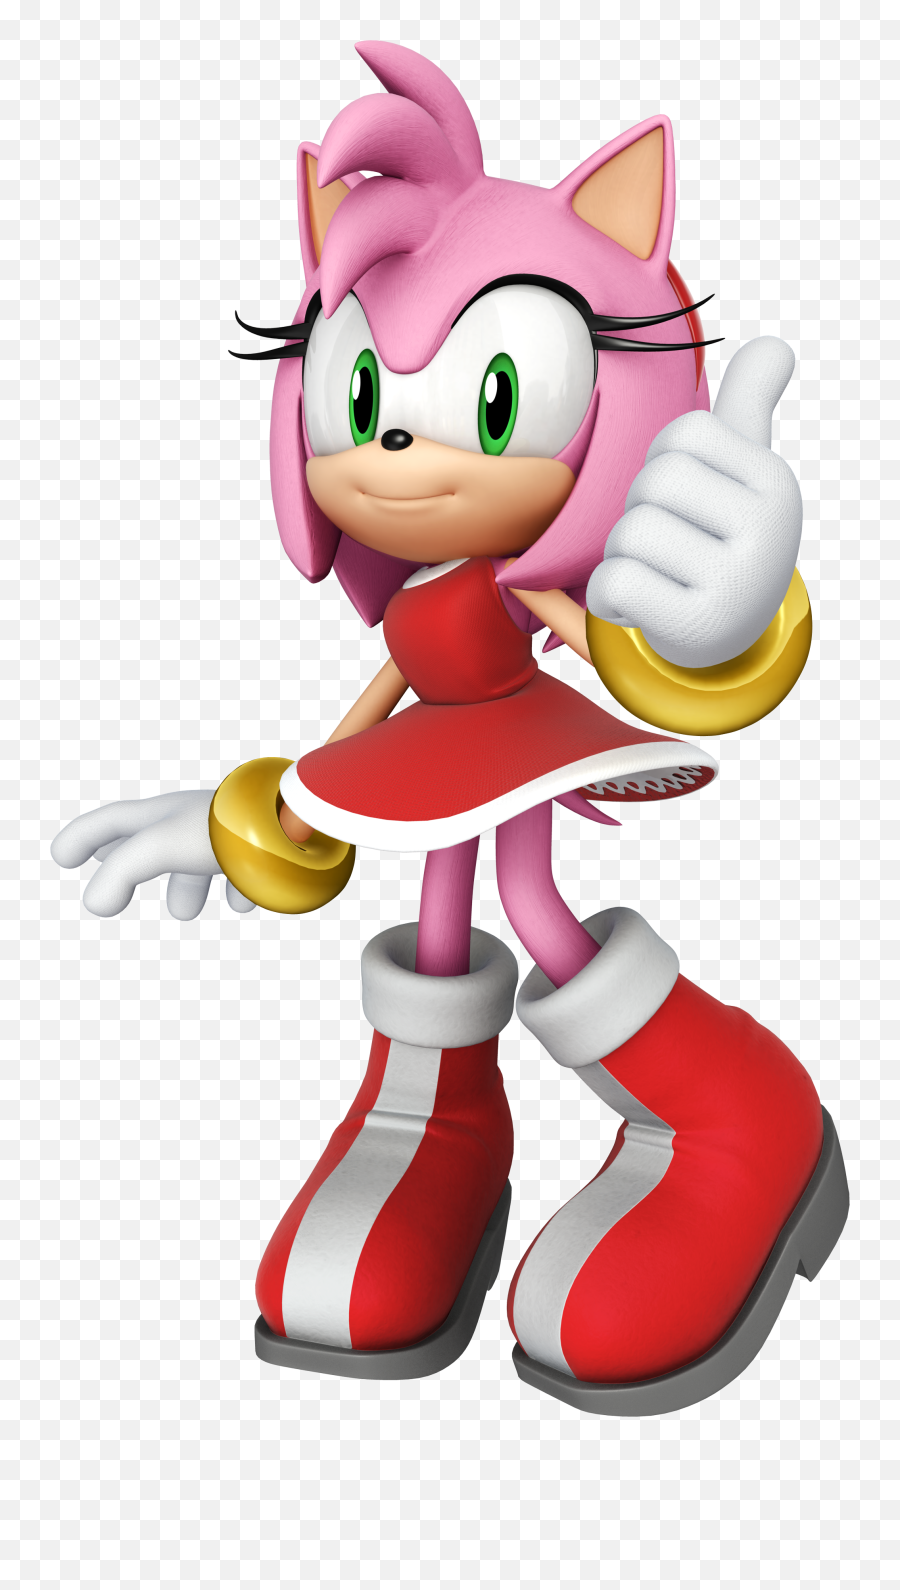 Download Sonic Toy Allstars Racing Character Chaos Fictional - Sonic The Hedgehog Amy Png,Cartoon Rose Png